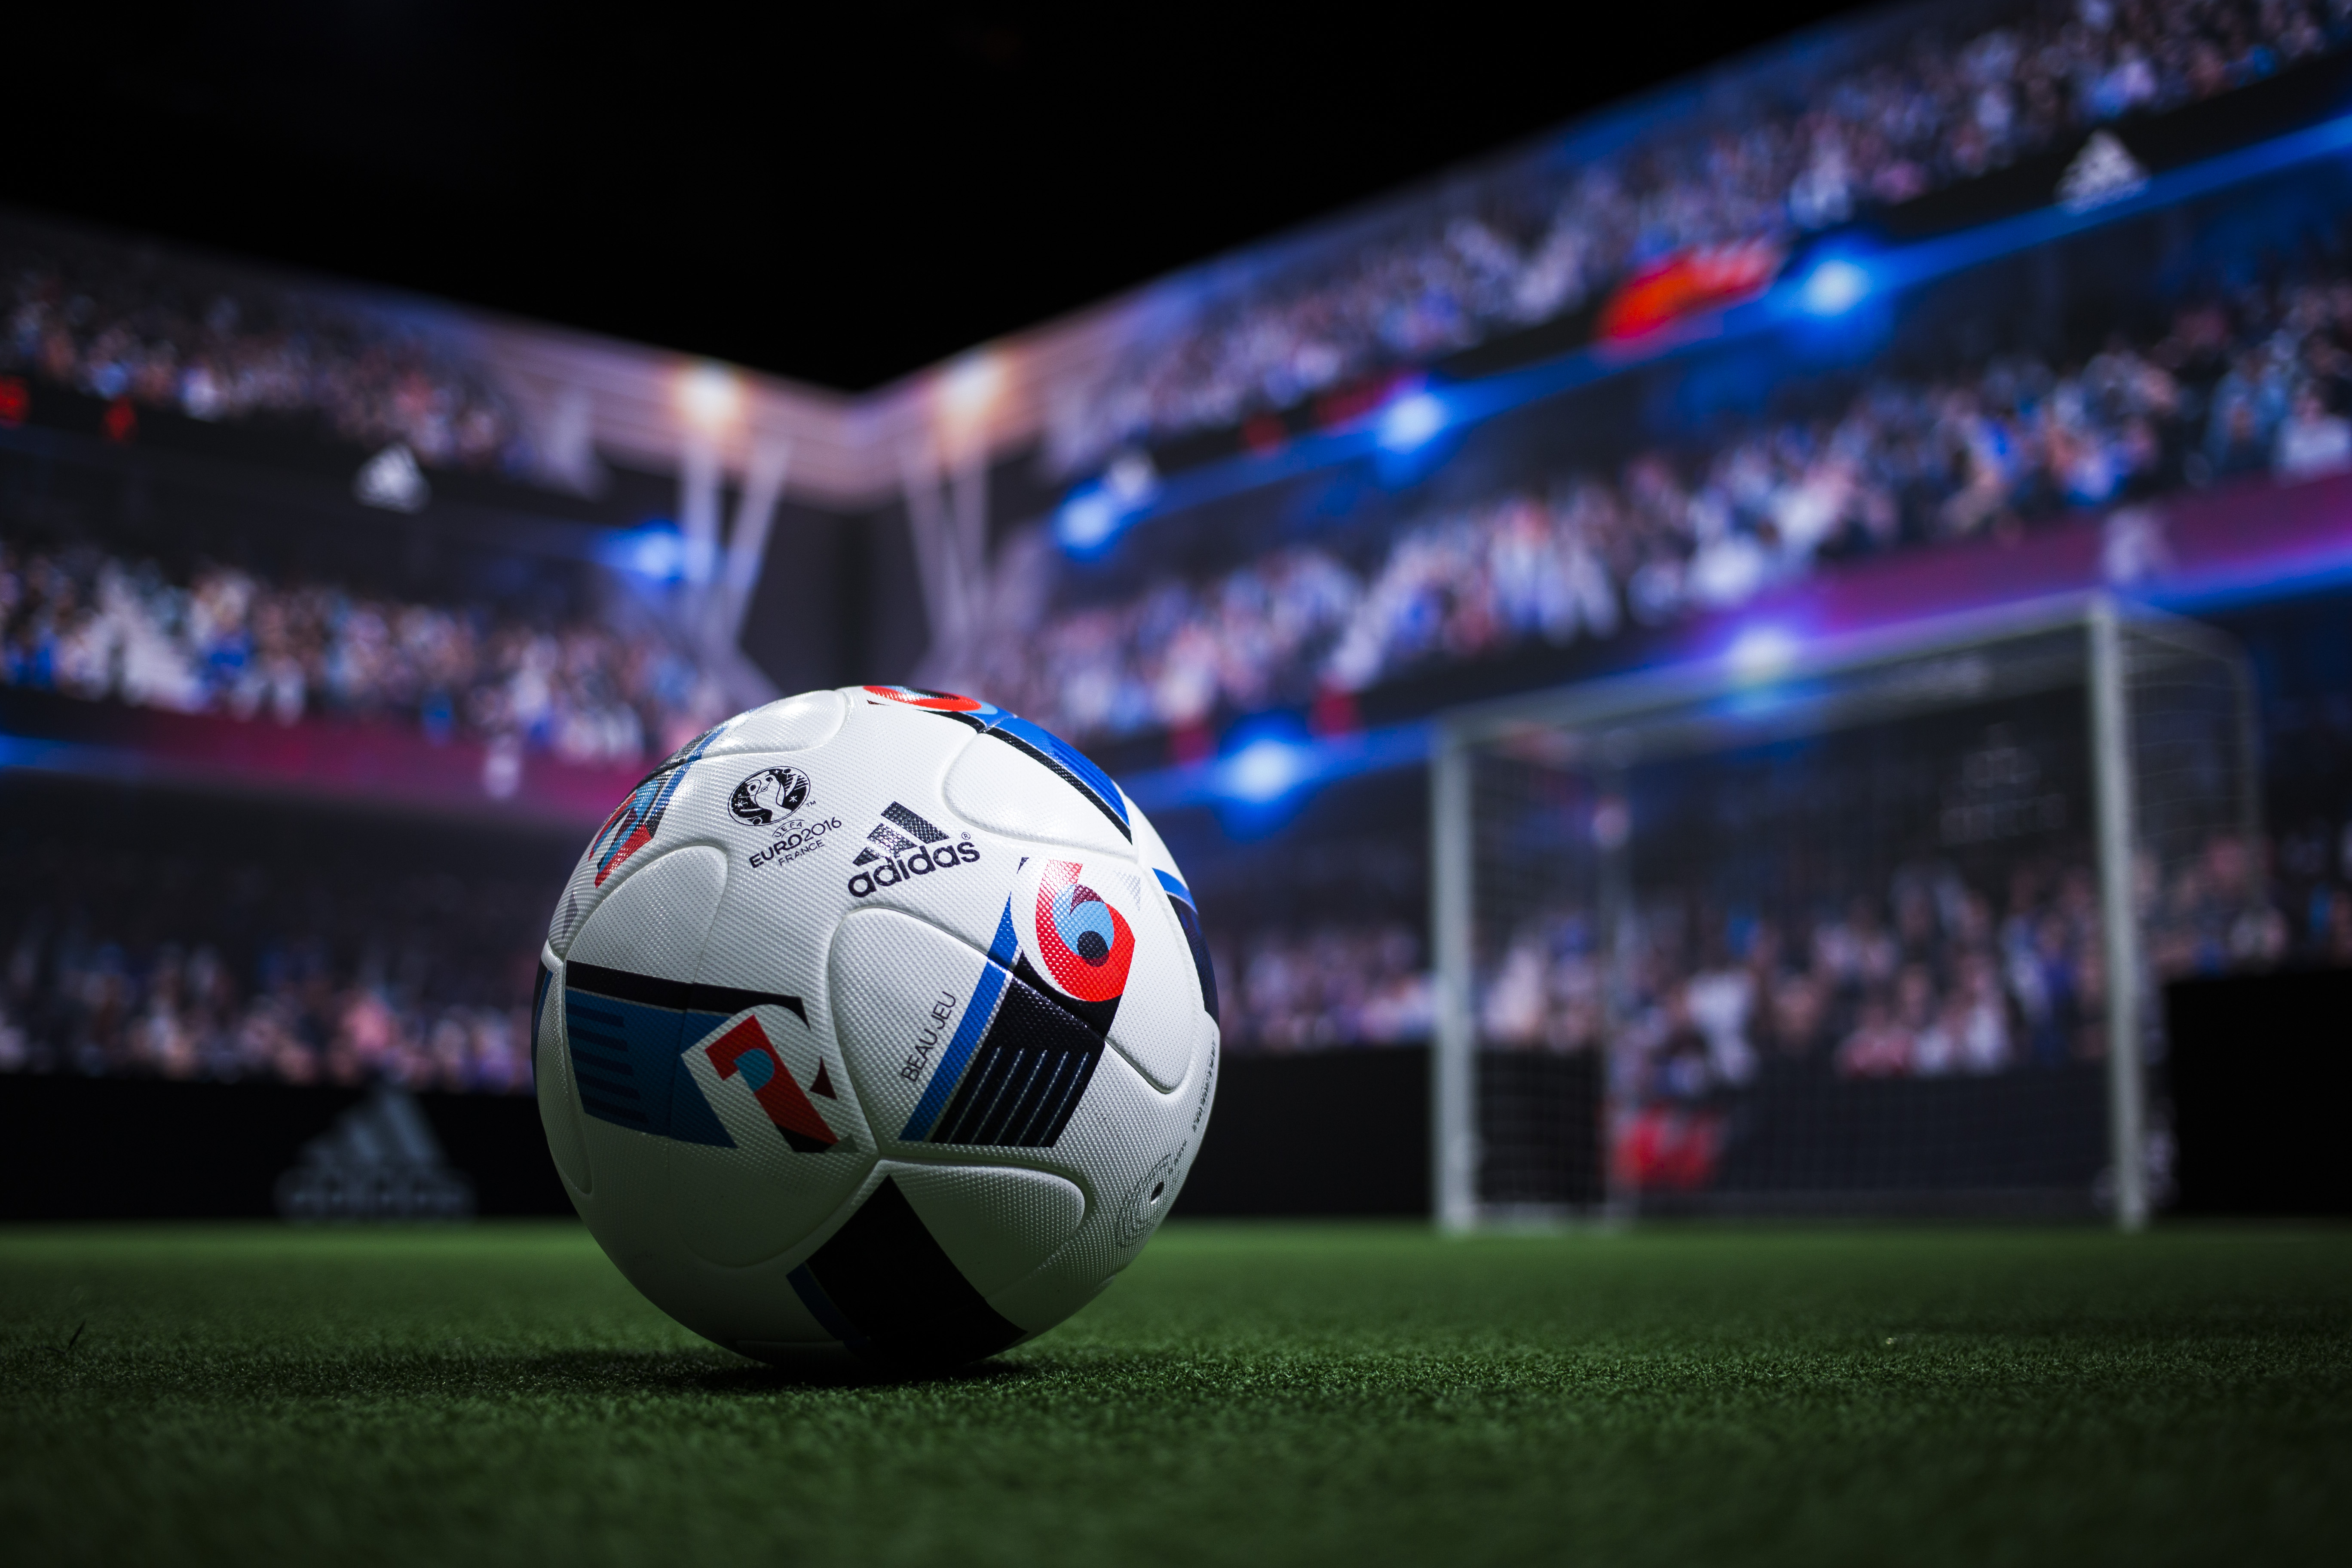 Soccer ball from Adidas - The official sponsor of UEFA ...